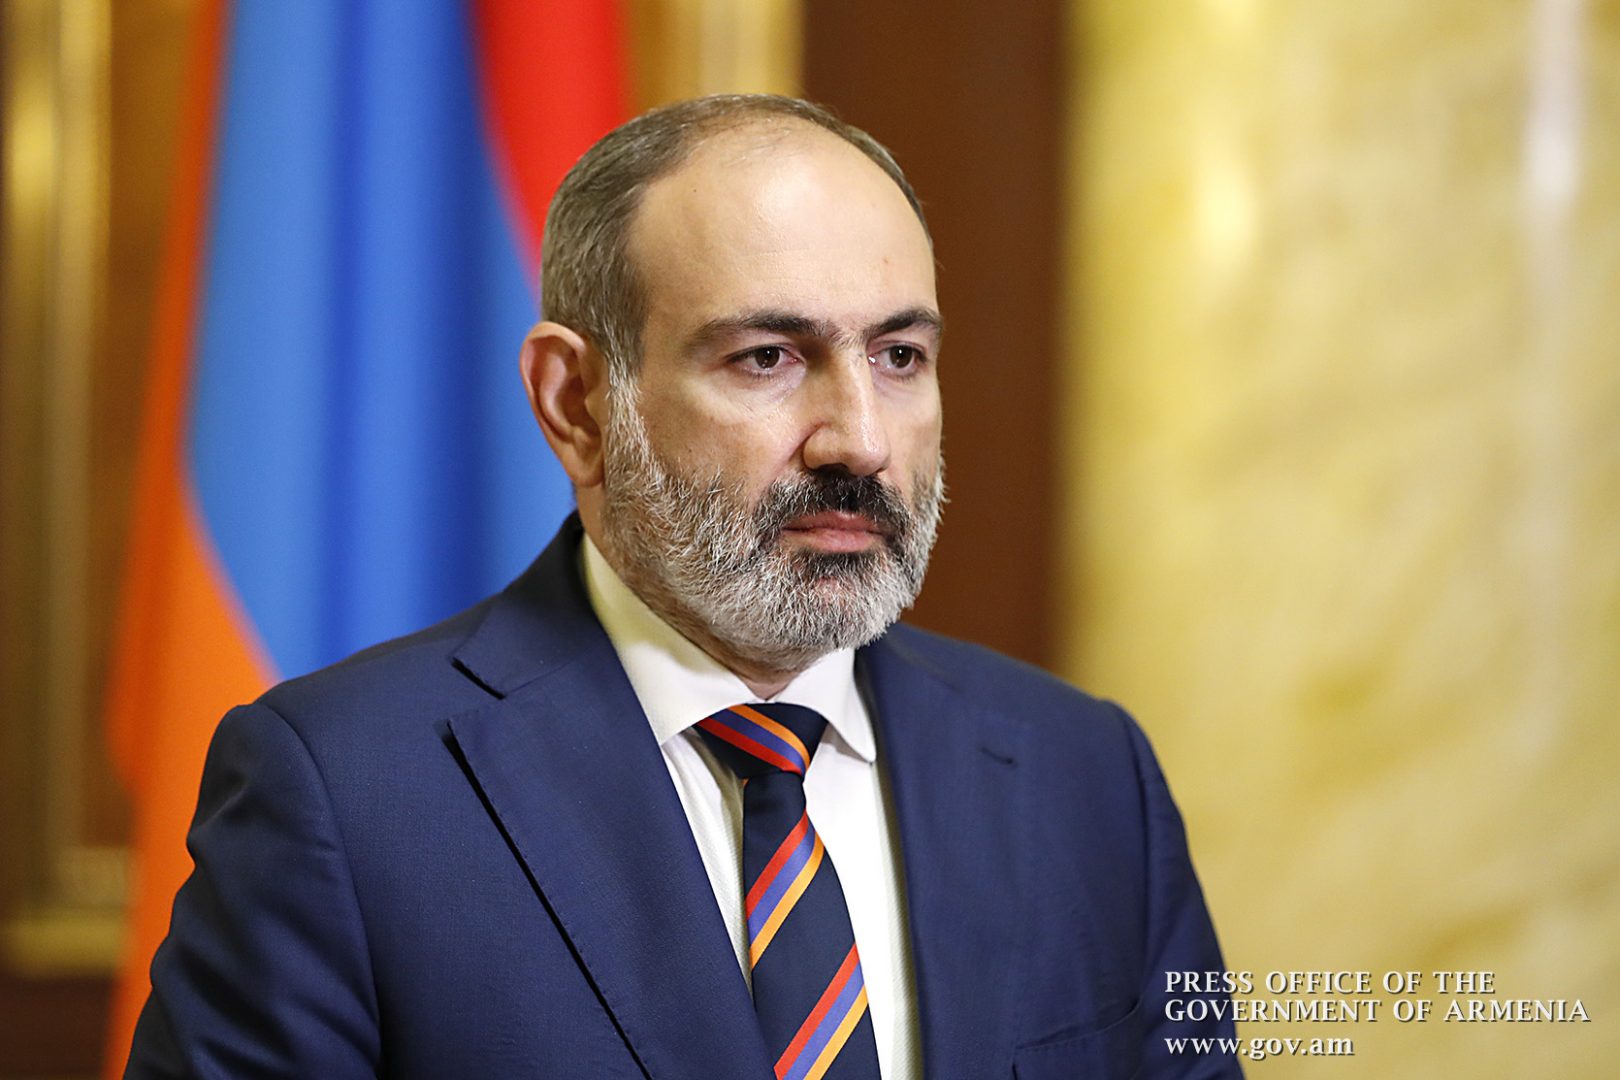 Armenians will build the homeland of their dream with hard work: Nikol Pashinyan’s message on Labor Day - The US Armenians